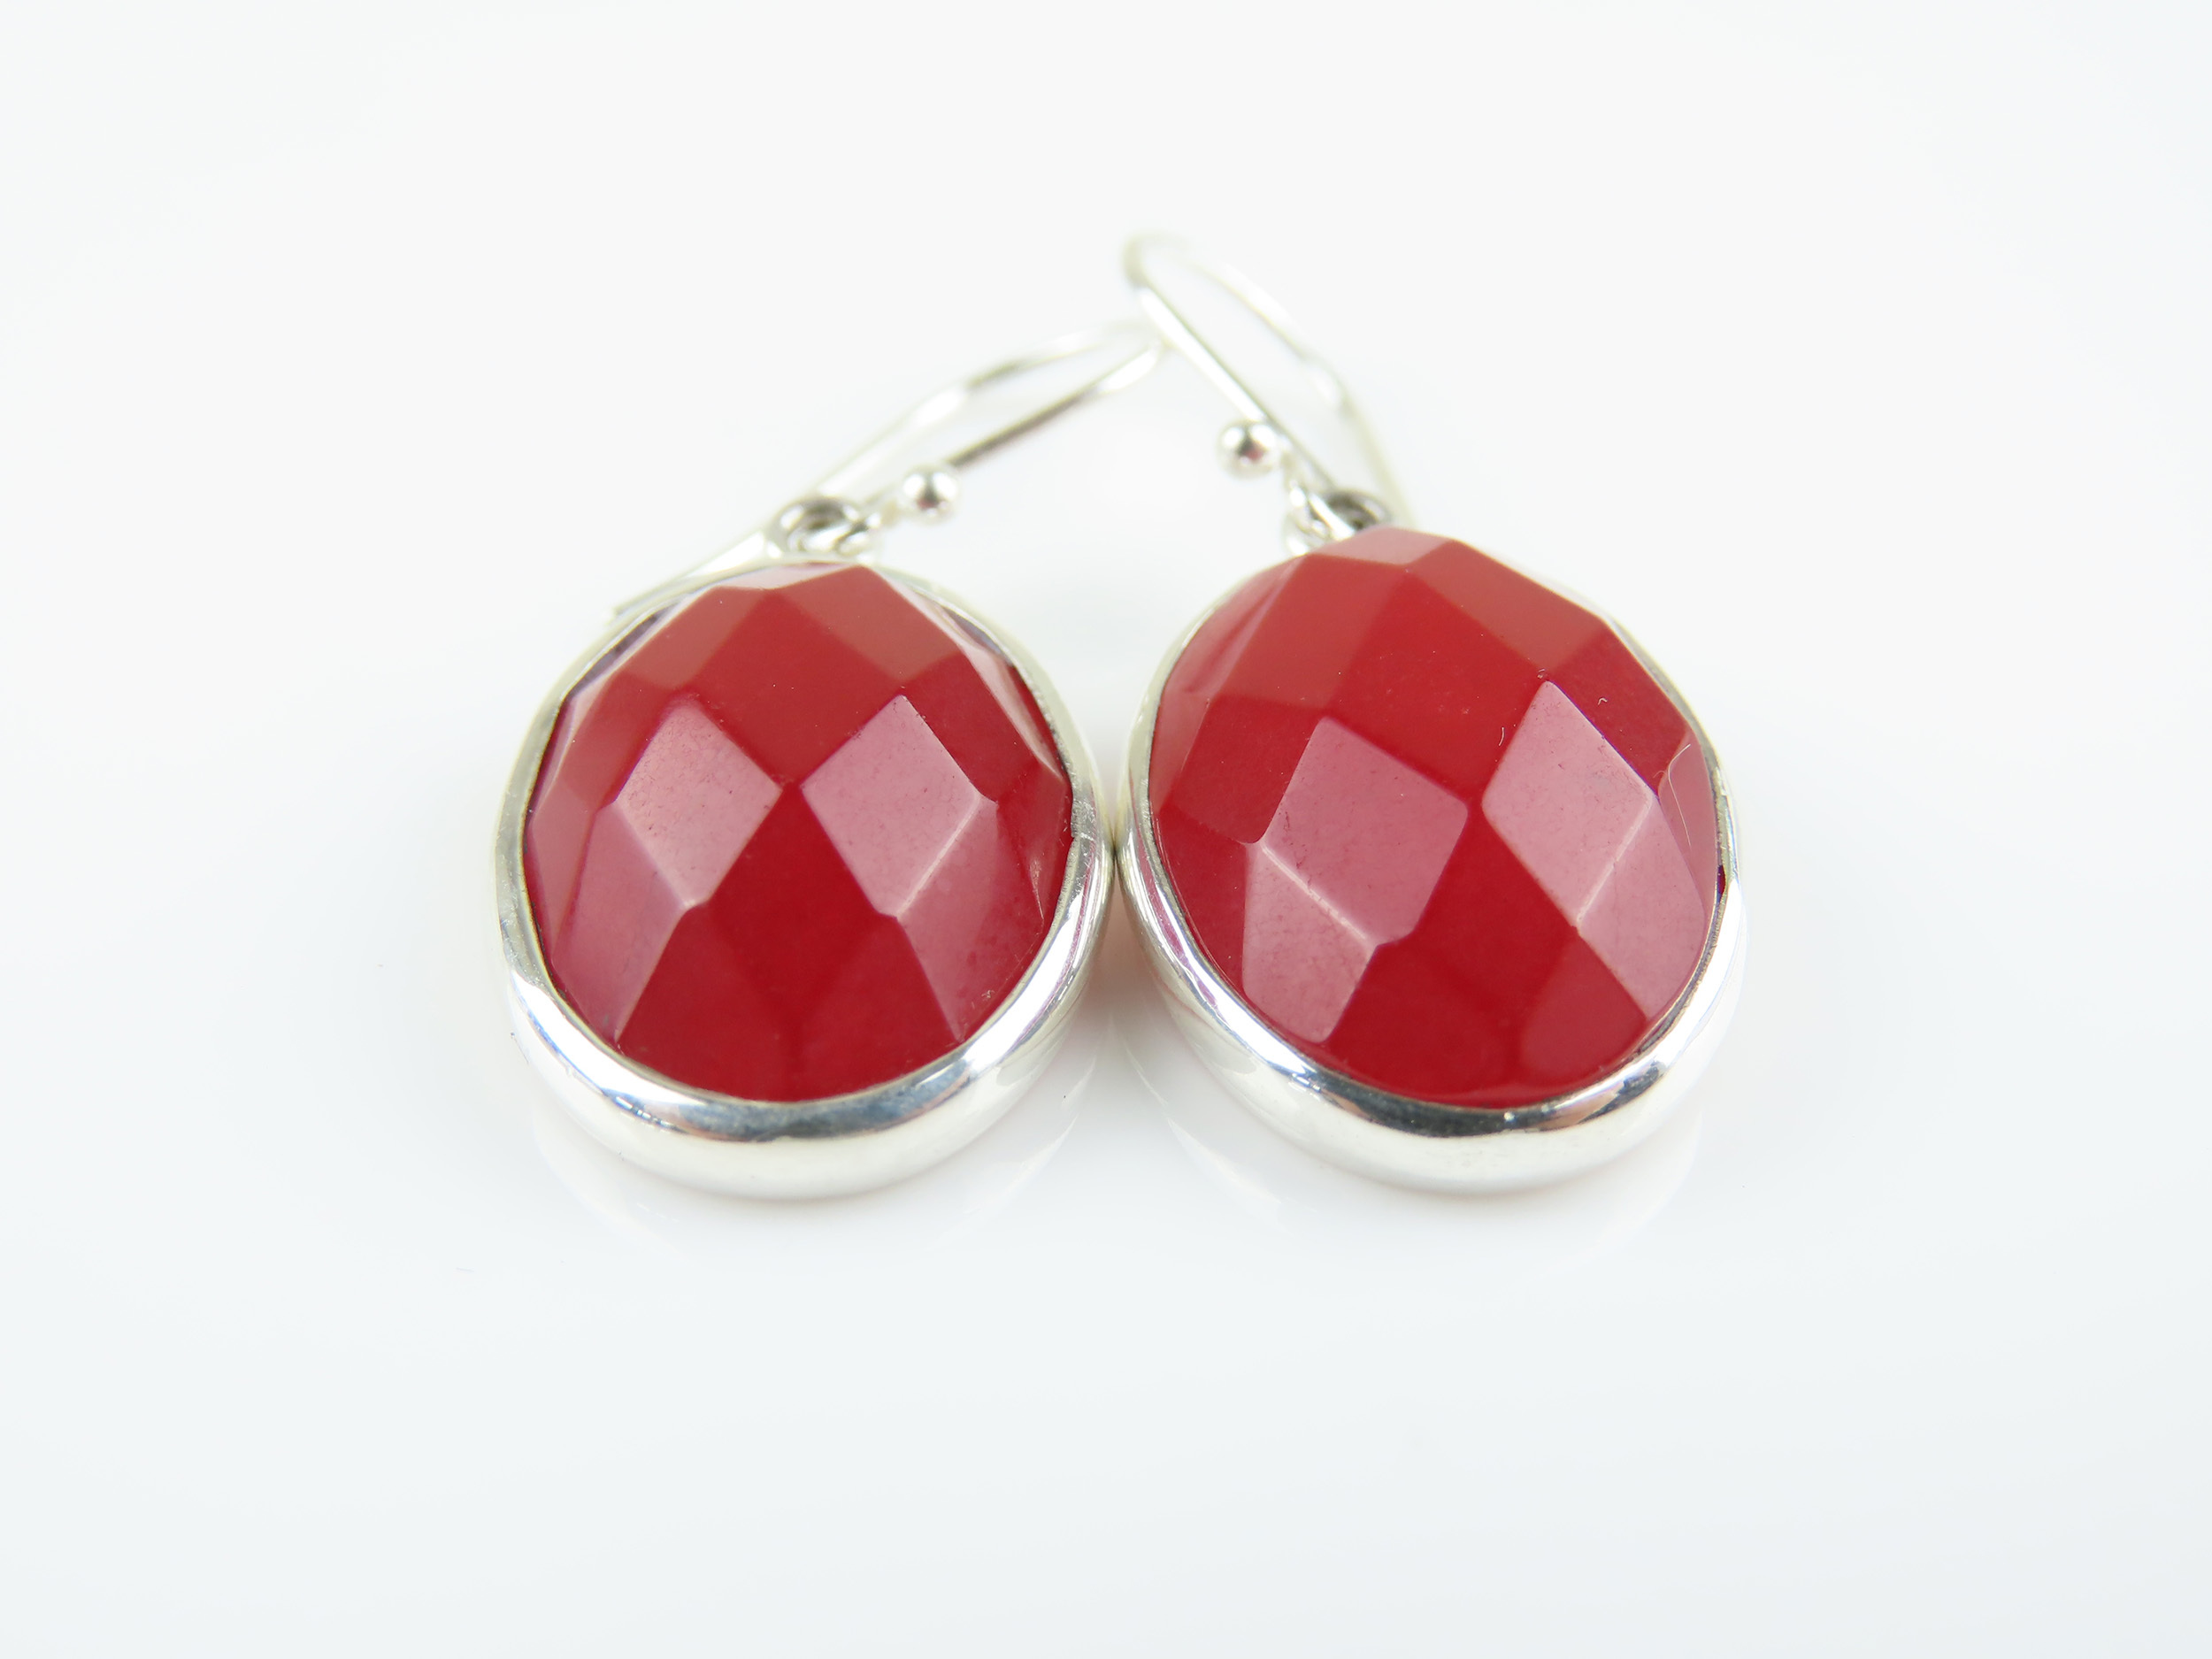 Details about   Sterling Silver Faceted CARNELIAN Gemstone Dangle Earrings #1223...Handmade USA 